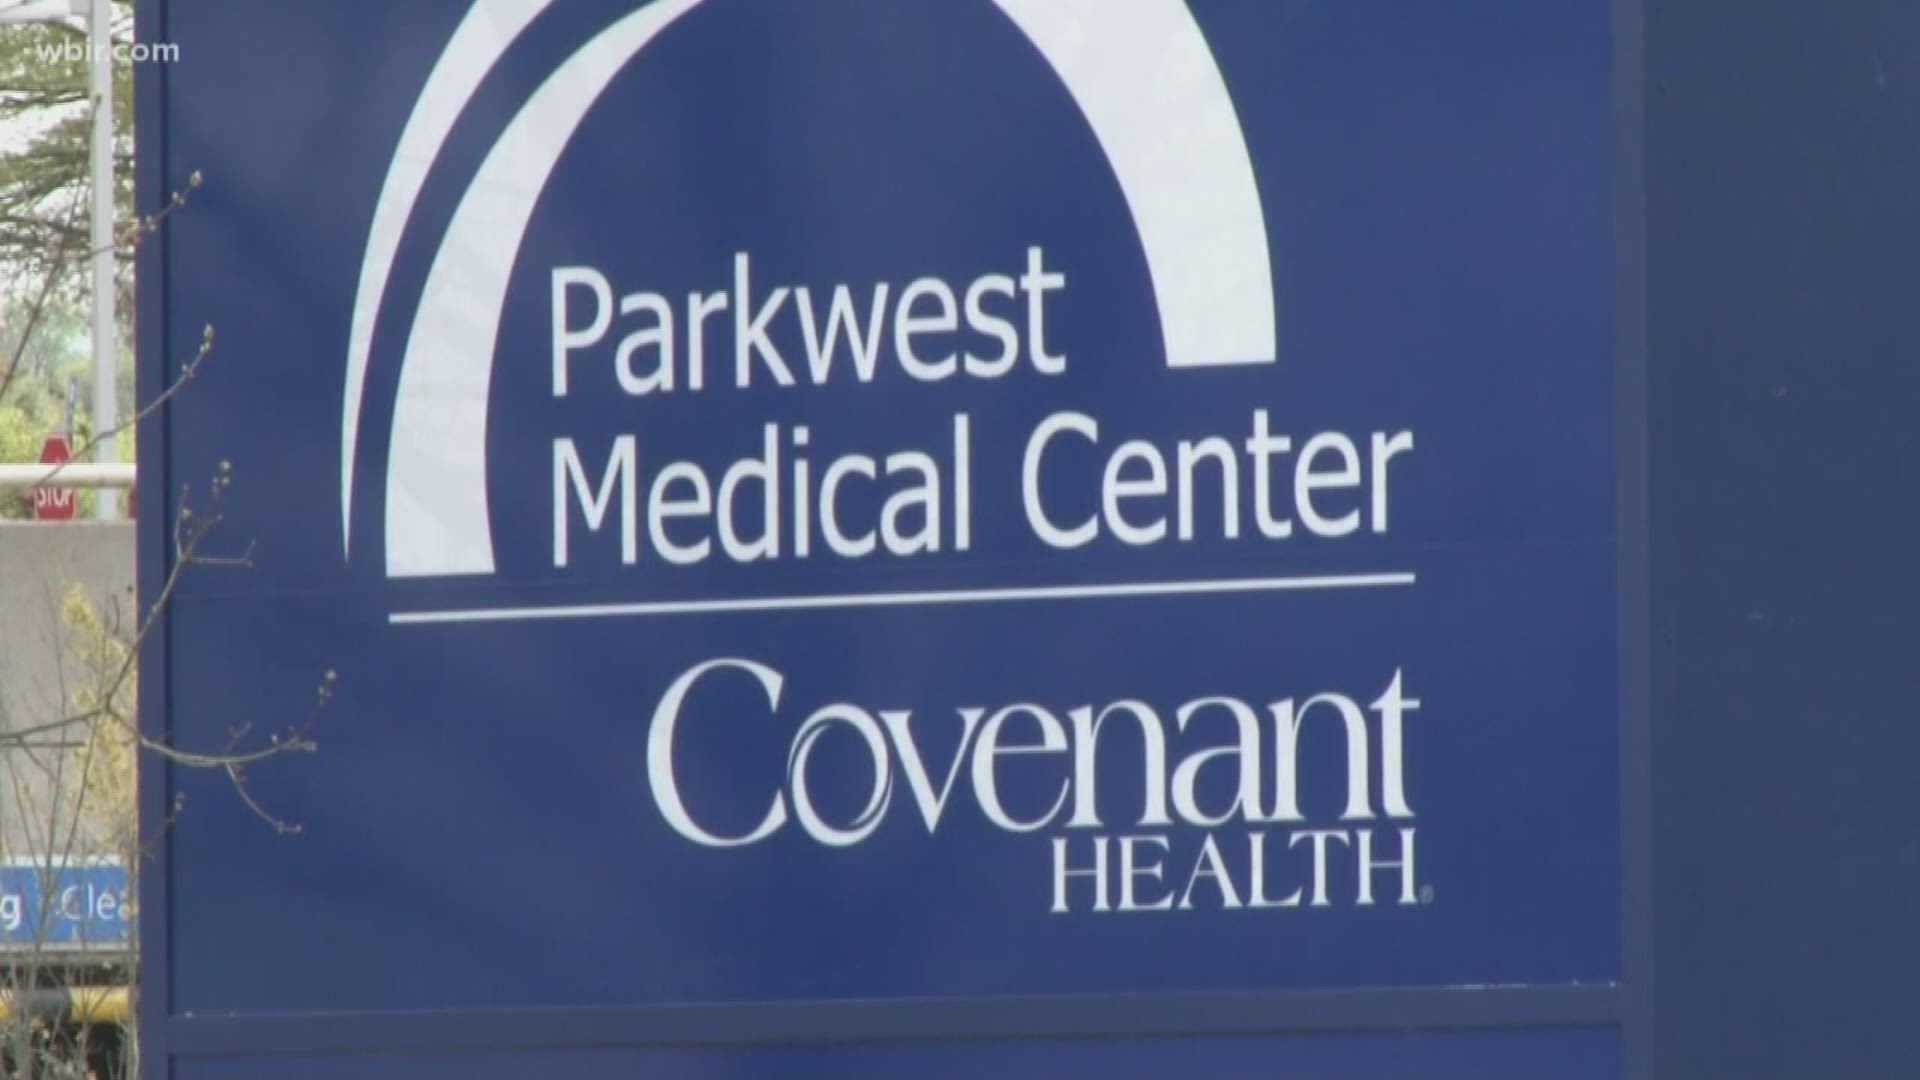 We have an update on the story about a nurse who quit her job at Parkwest Medical Center due to concerns about PPE.